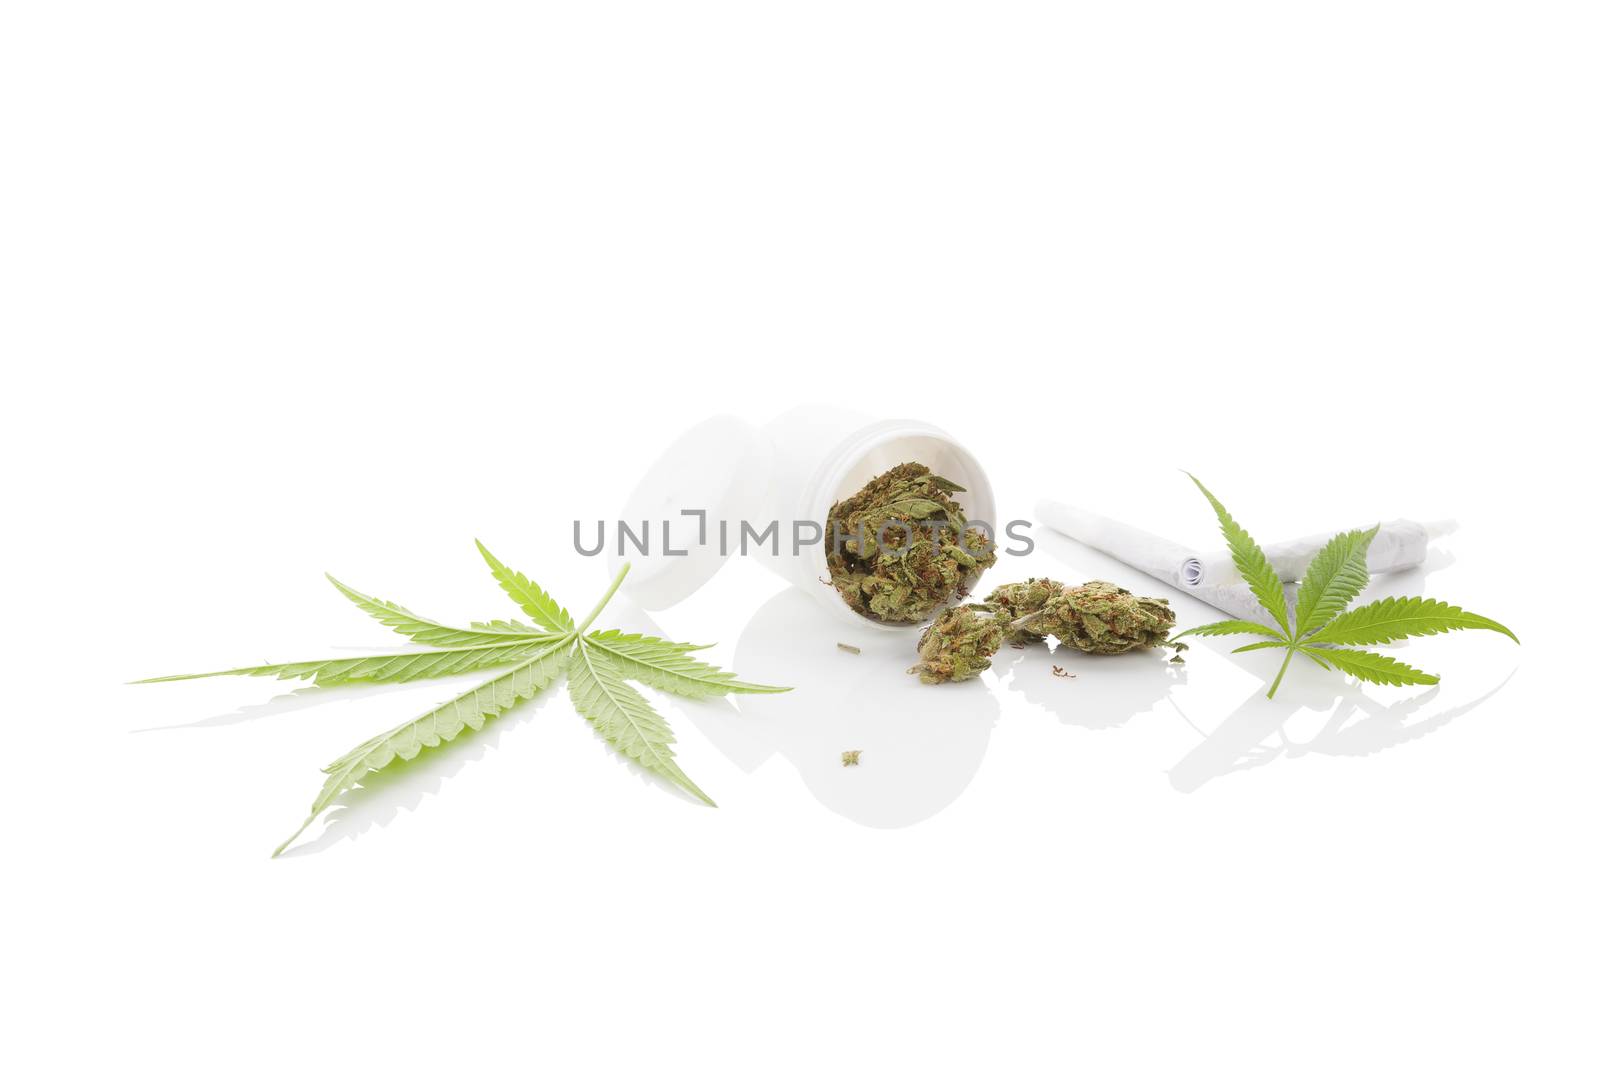 Medical marijuana. Cannabis bud and leaf and white container isolated on white background with reflection